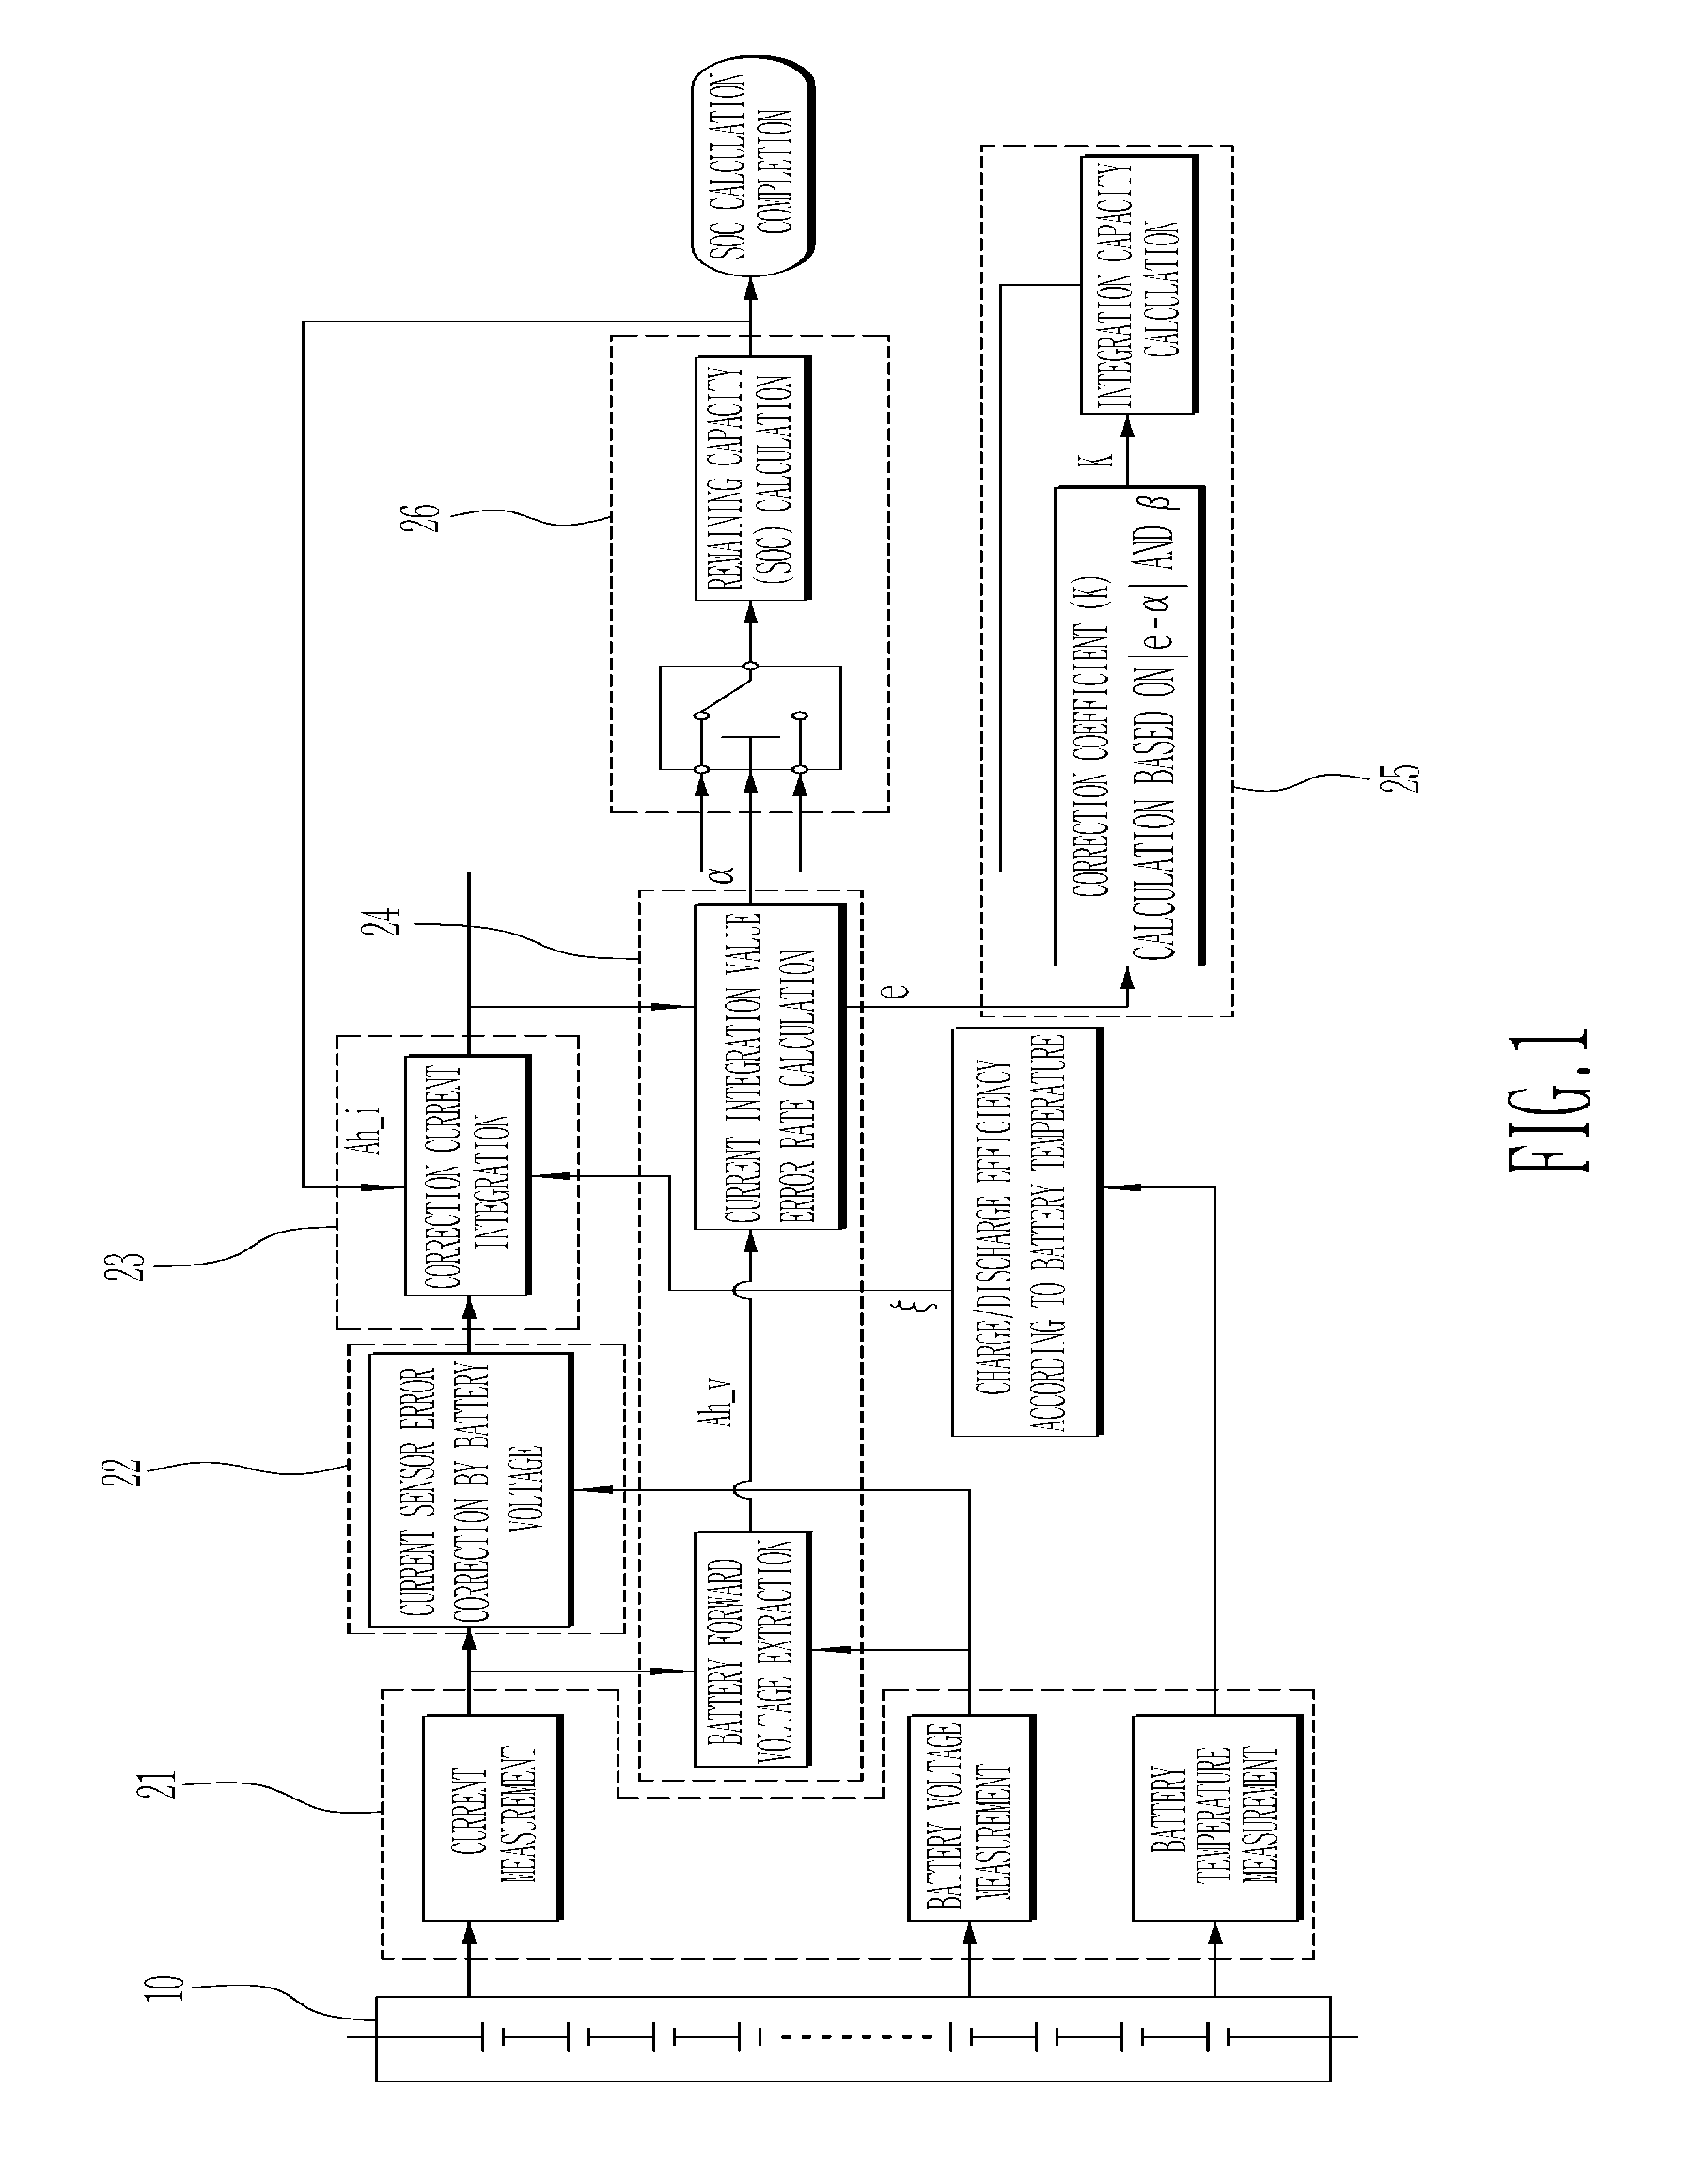 Method for estimating remaining capacity of battery